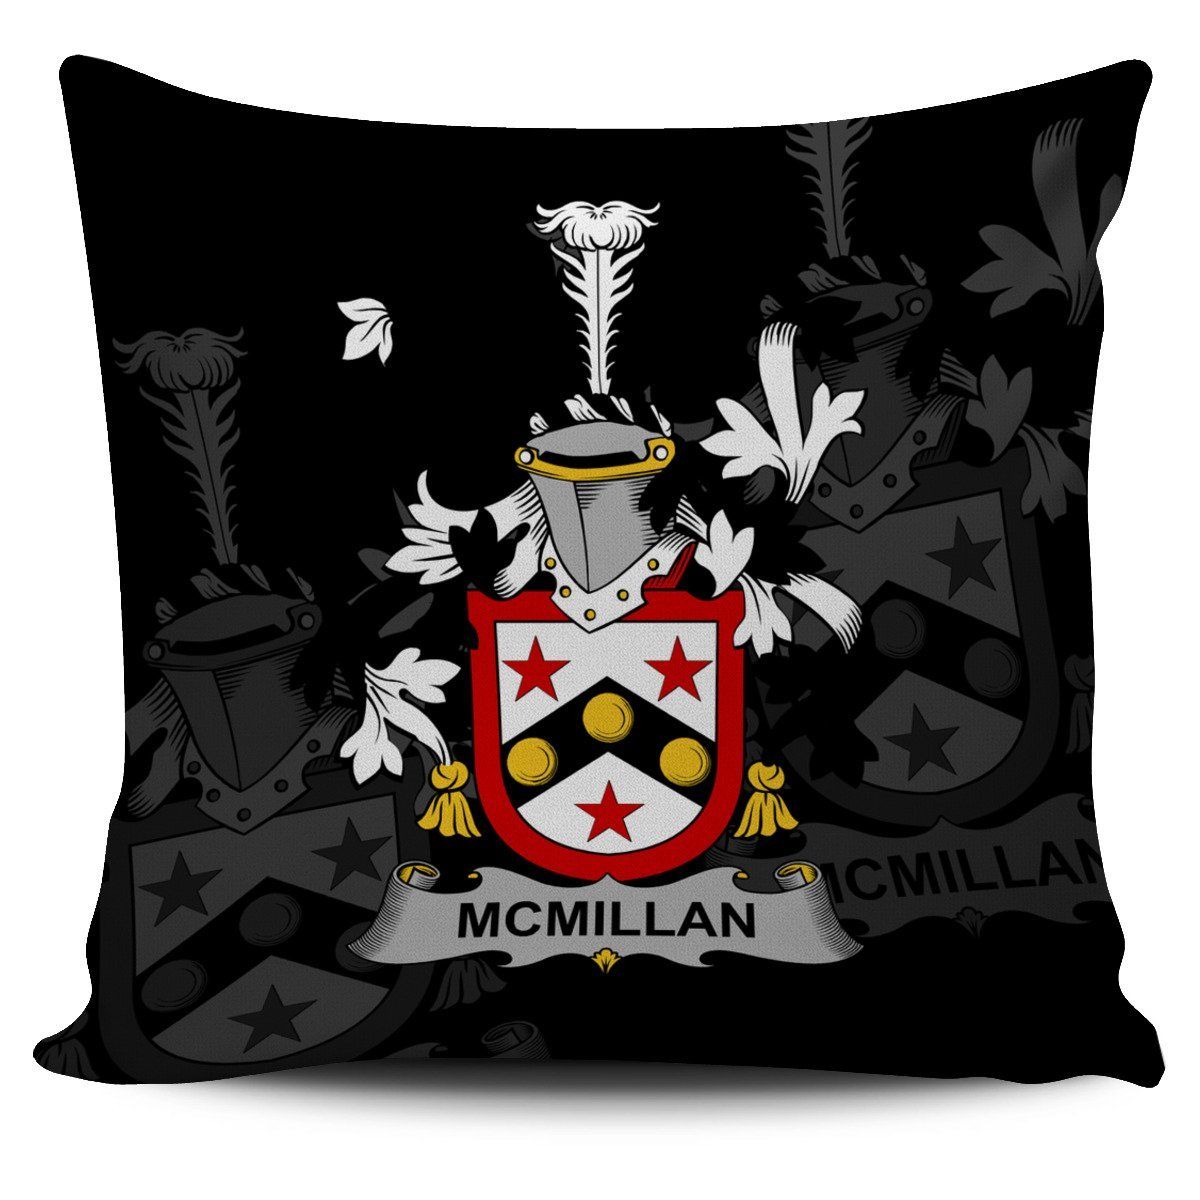 McMillan Ireland Pillow Covers - Irish Family Crest | Over 1400 Crests ...